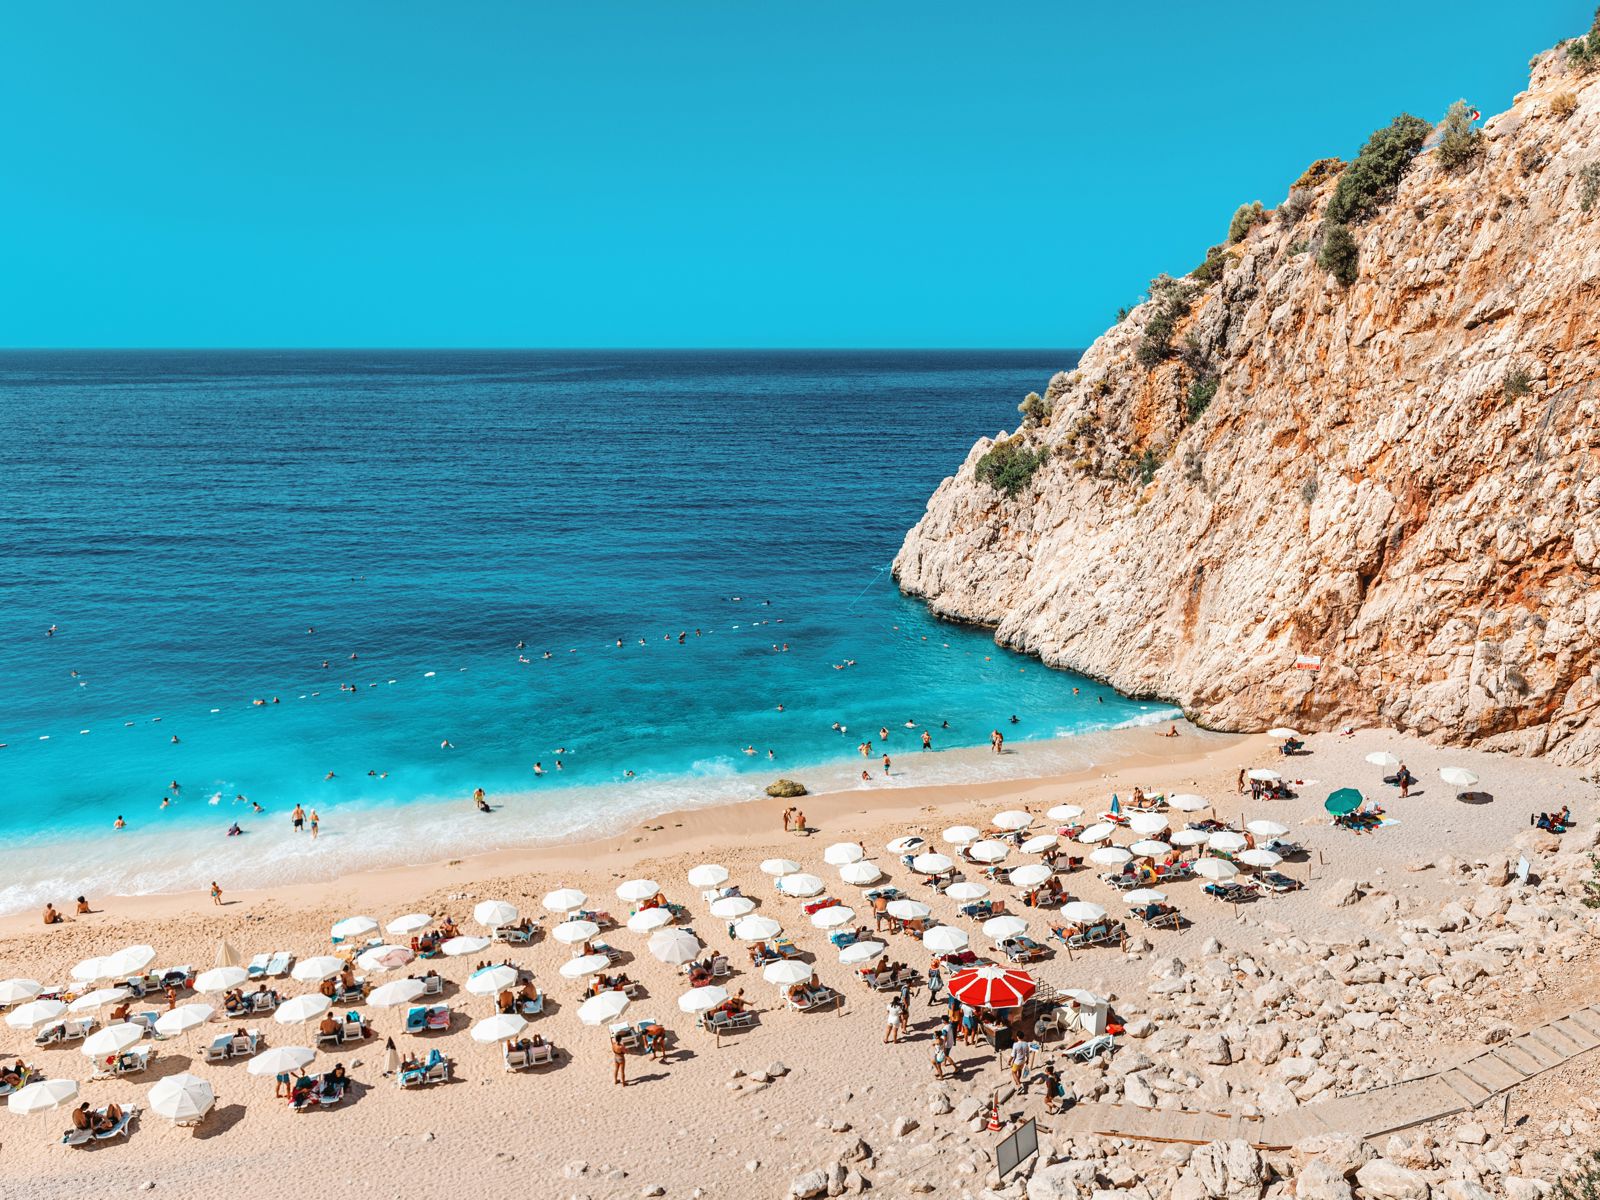 Beach with cliffs and sun loungers facing blue sea